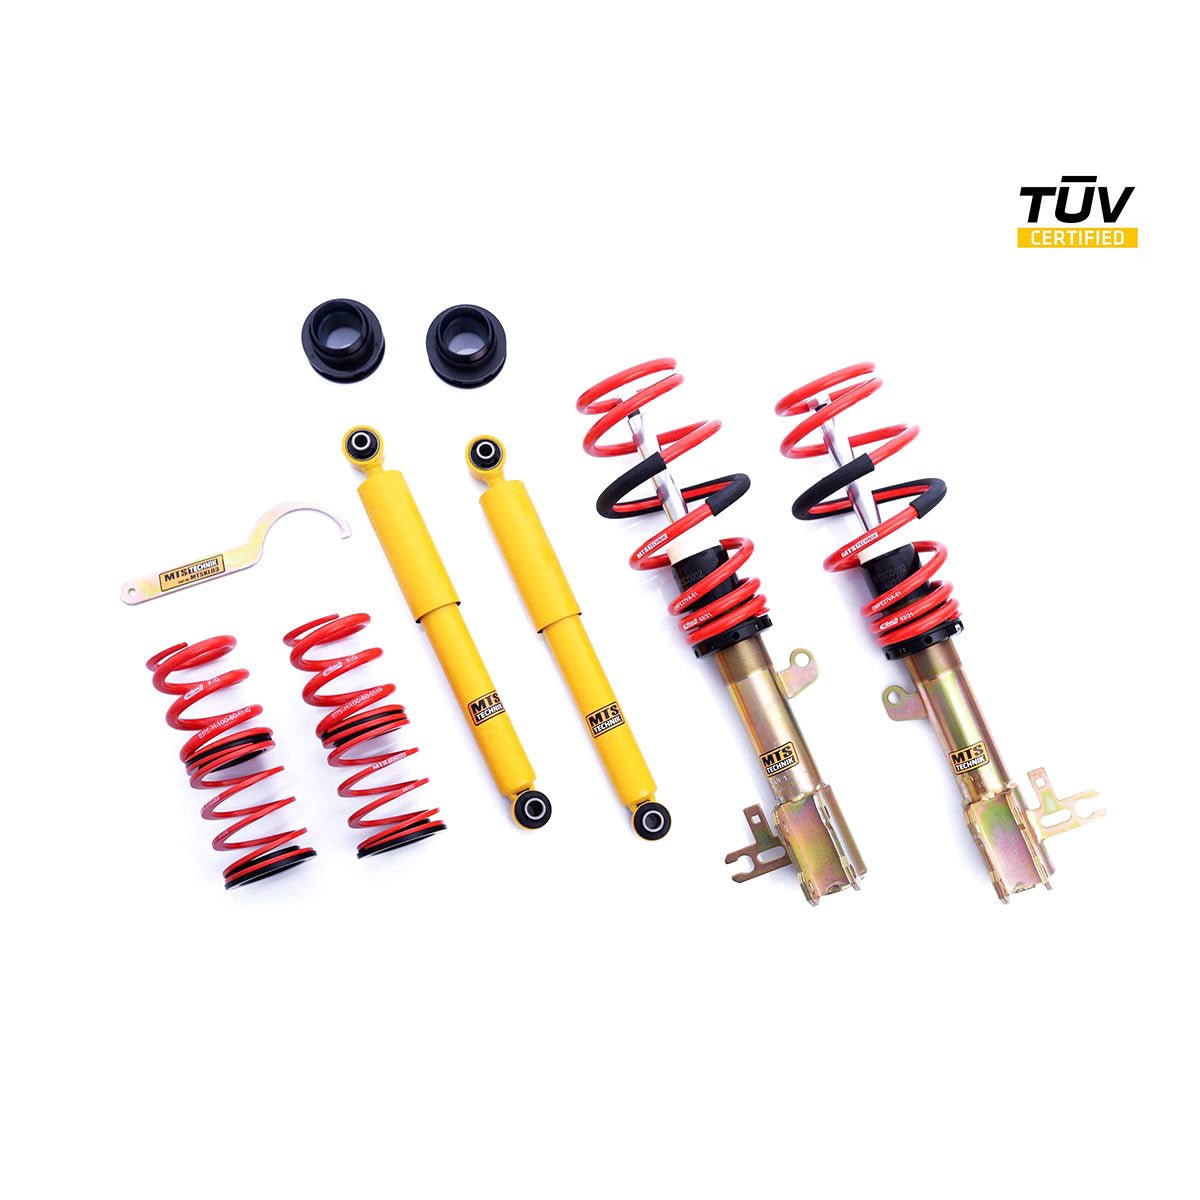 MTS TECHNIK coilover kit SPORT Opel Astra H station wagon (with TÜV) - PARTS33 GmbH